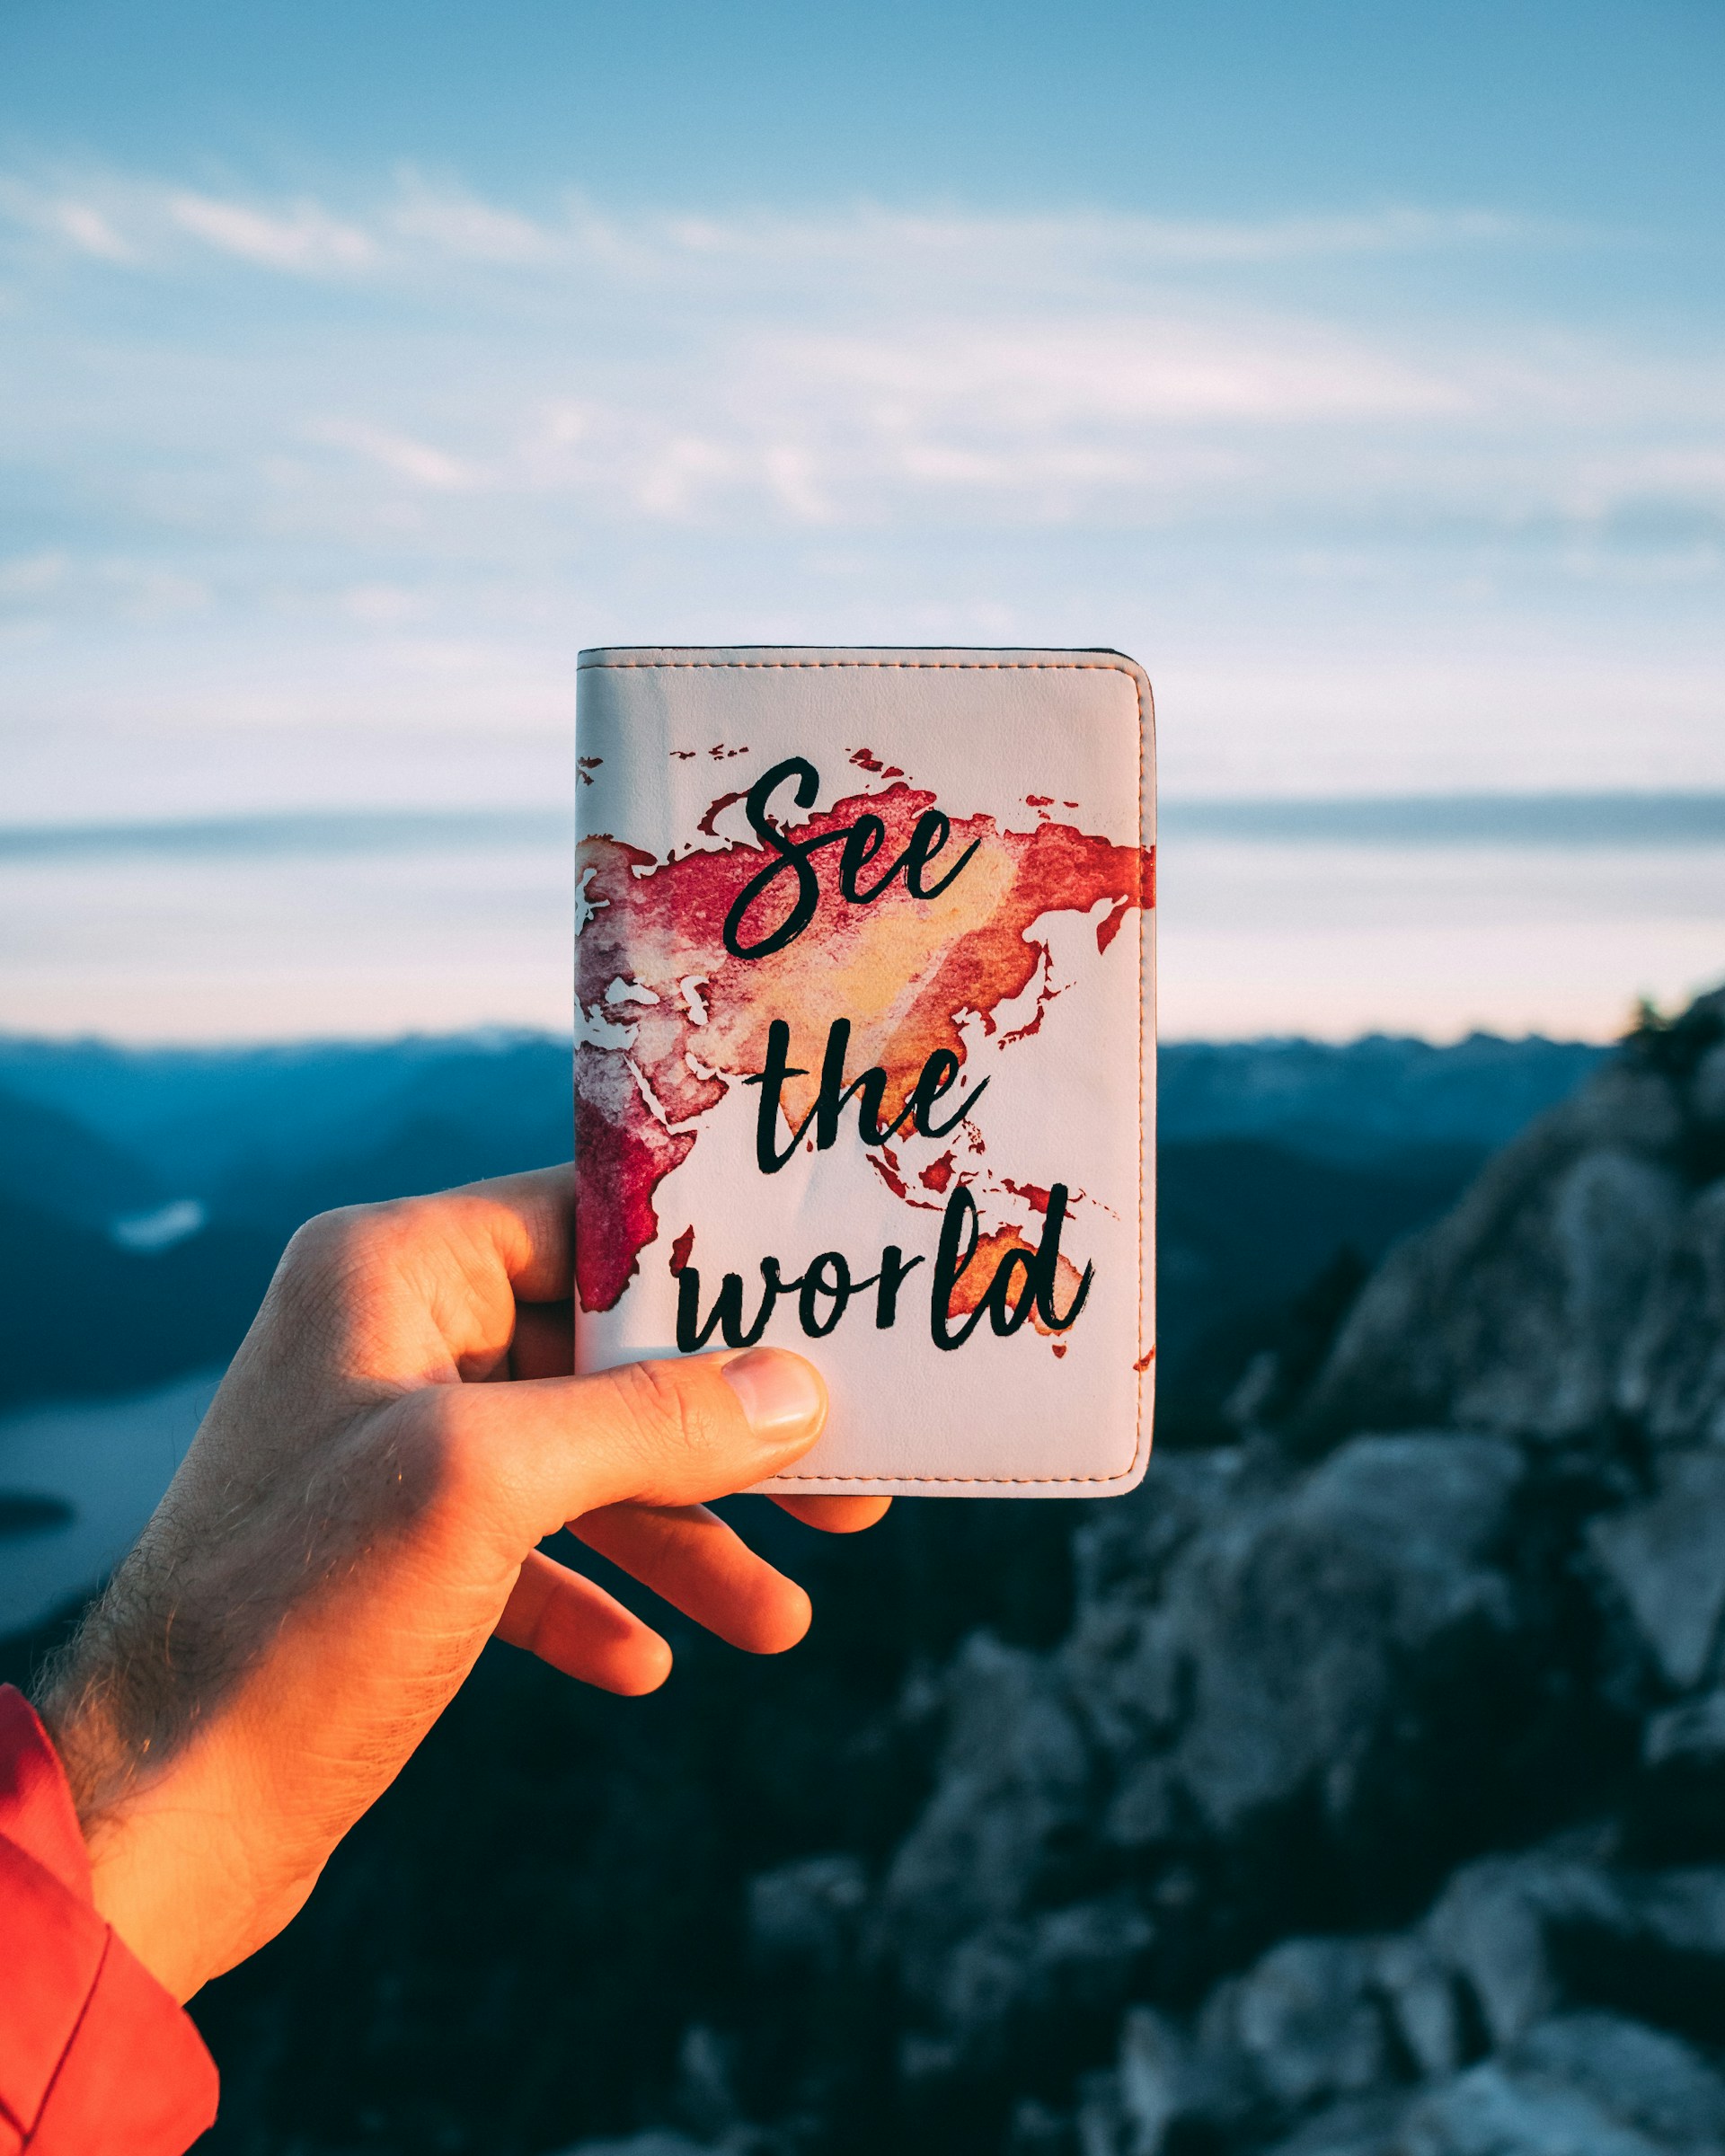 "See the World" custom passport cover, a product you can create yourself with print on demand services. (photo: WanderLabs, Unsplash)